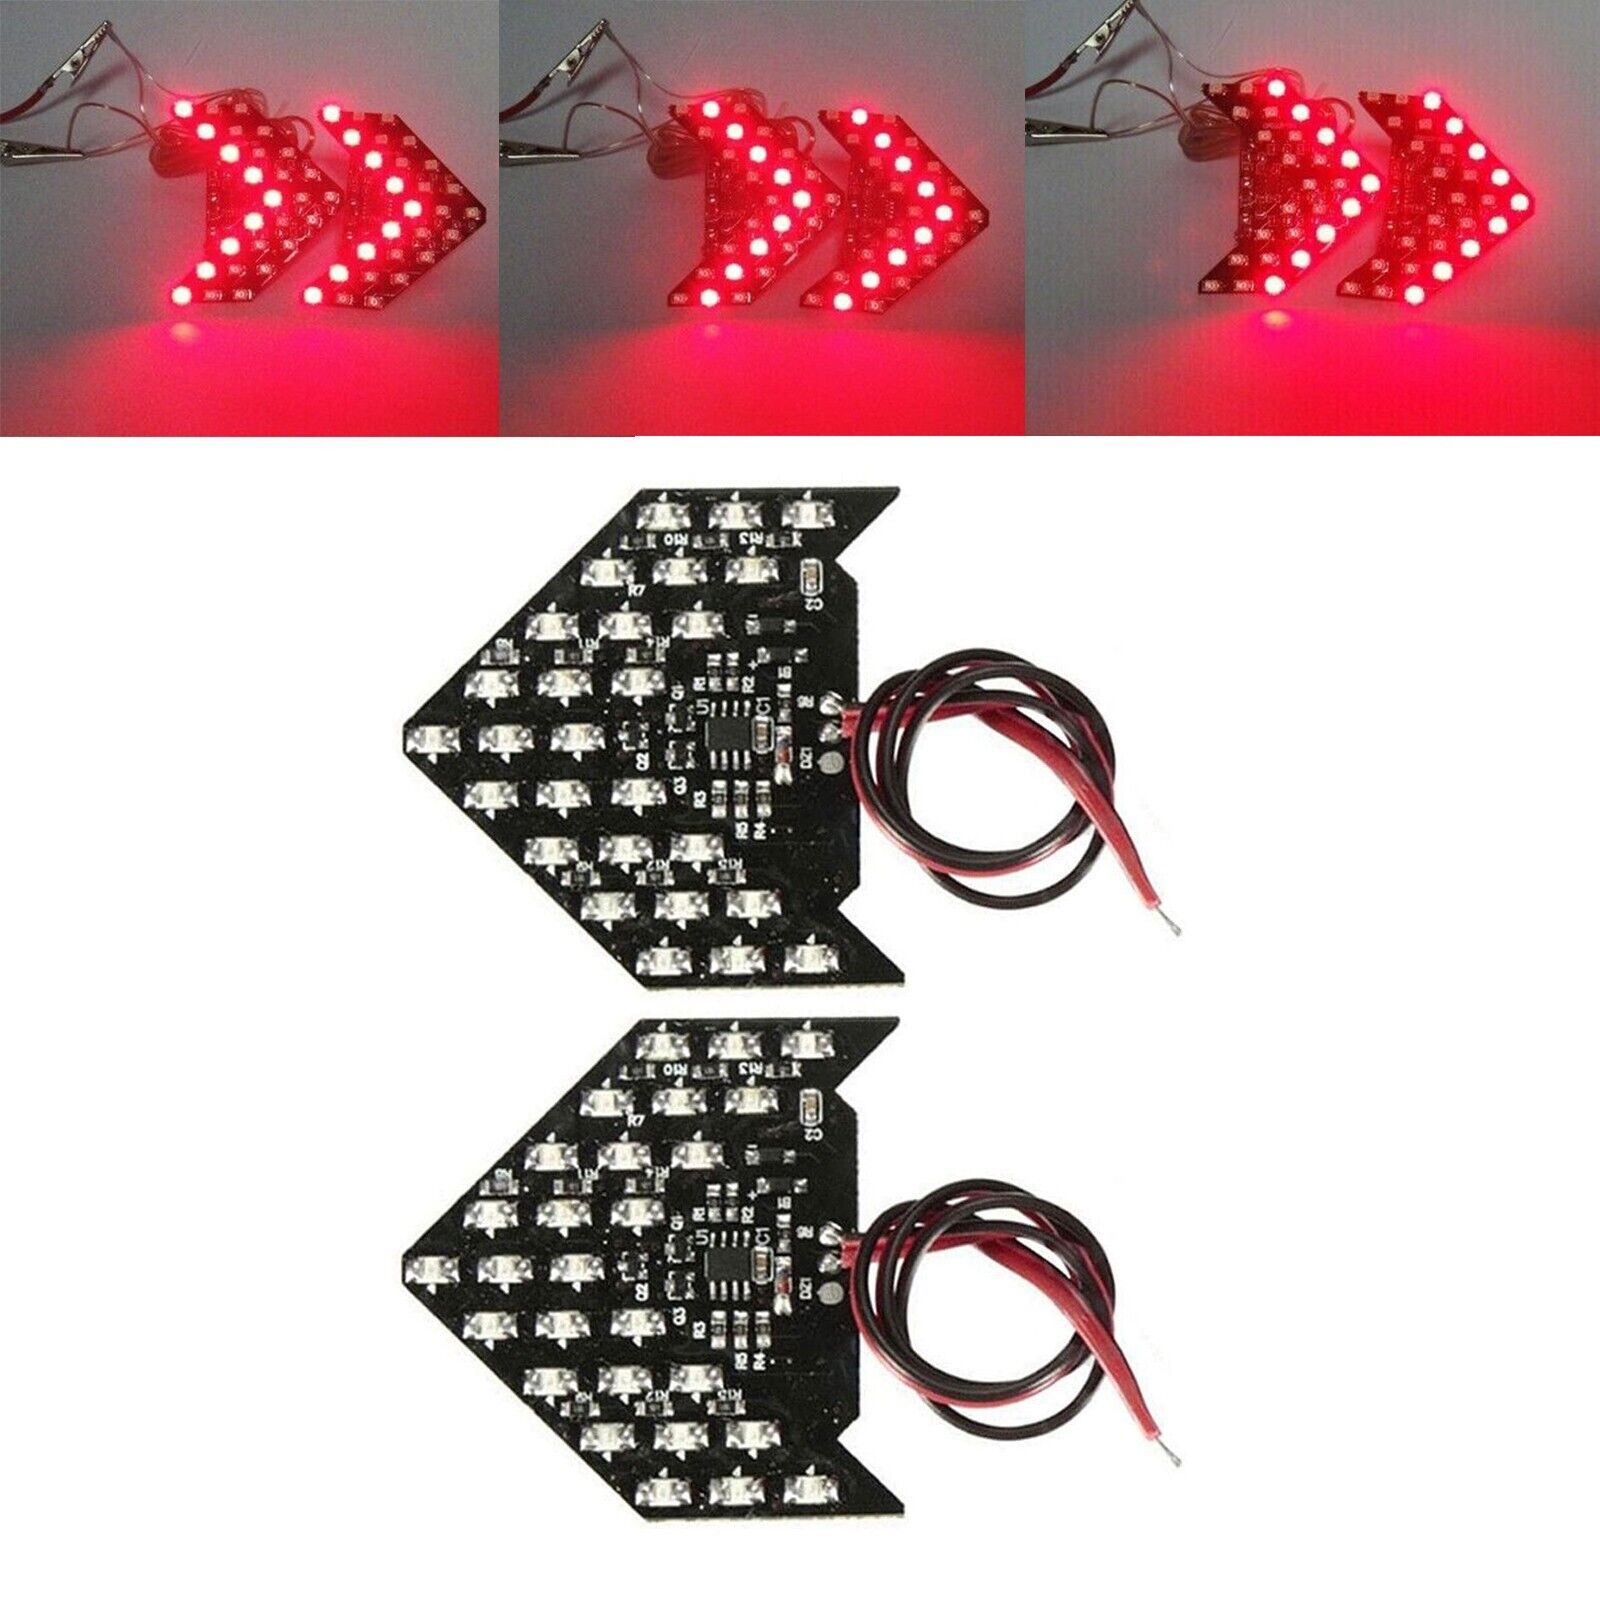 2x Red 27 LED Car Rear View Side Mirror Sequential Arrow Panel Turn Signal Light